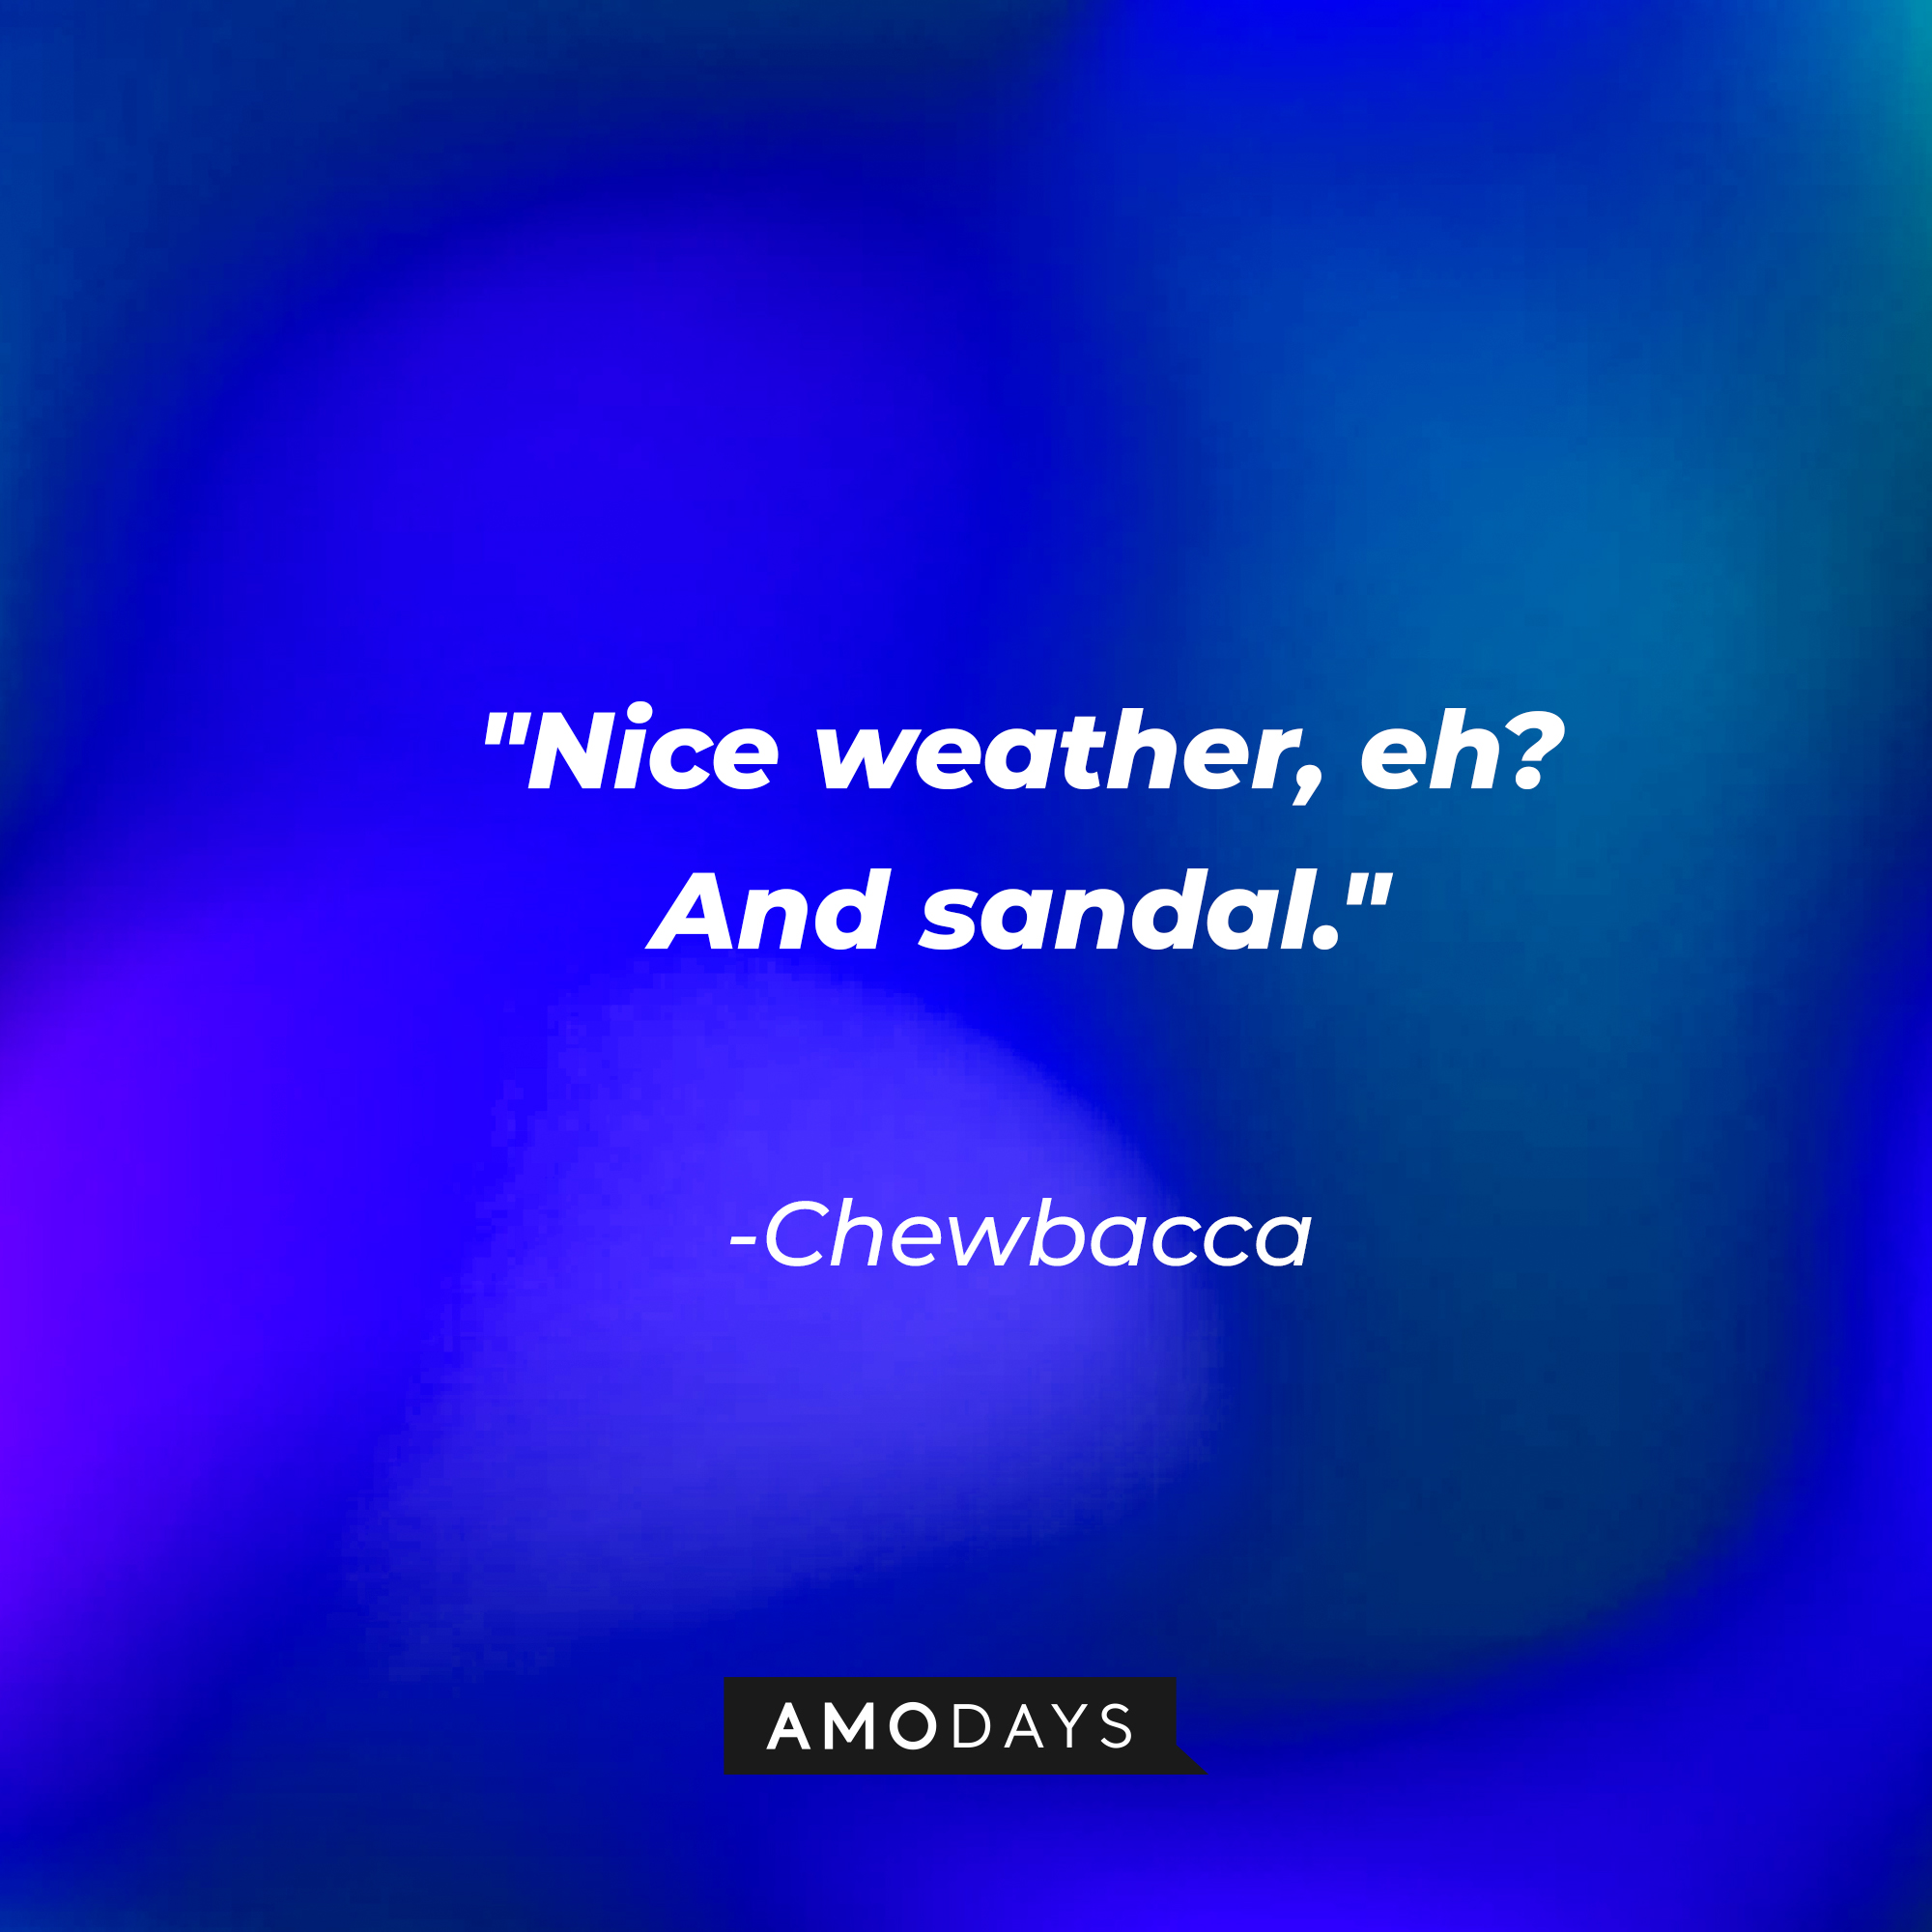 Chewbacca's quote: "Nice weather, eh? And sandal." | Source: AmoDays